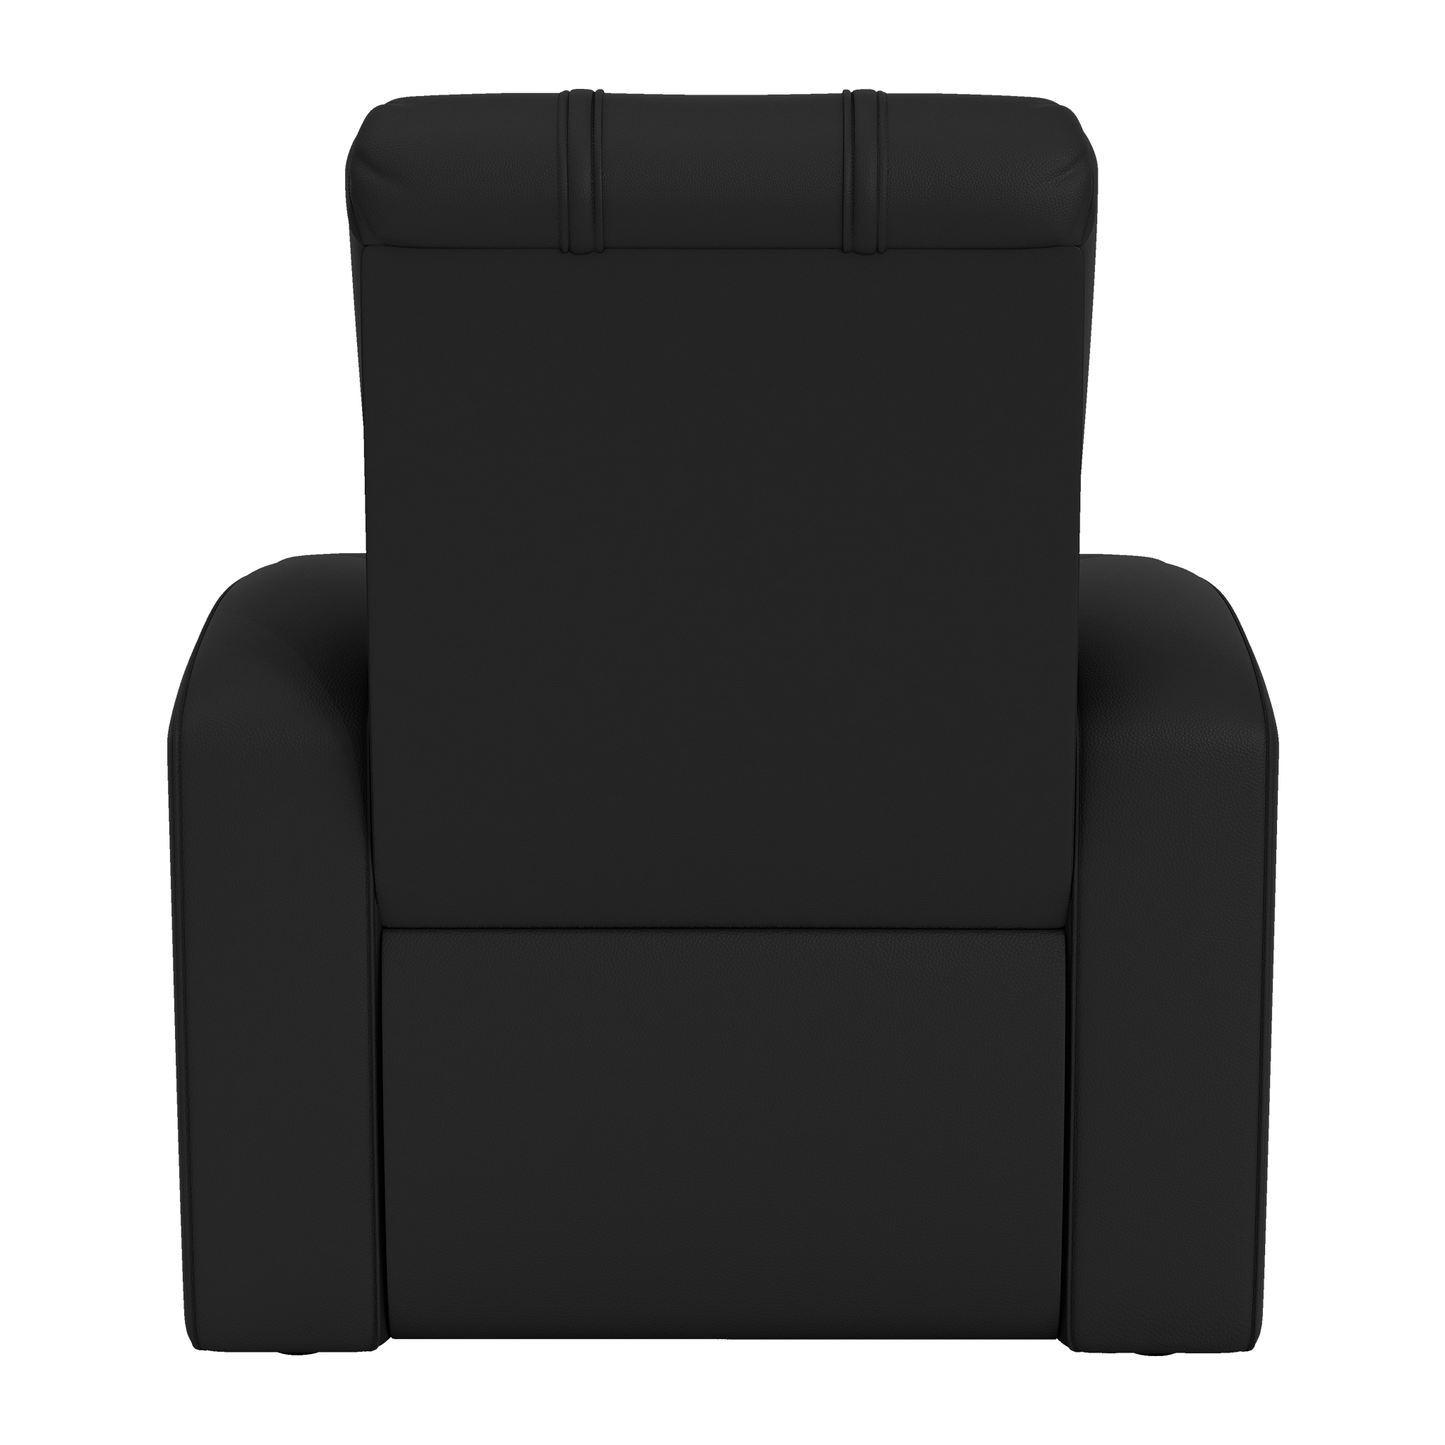 Relax Home Theater Recliner with Bucks Gaming Primary Logo [Can Only Be Shipped to Wisconsin]